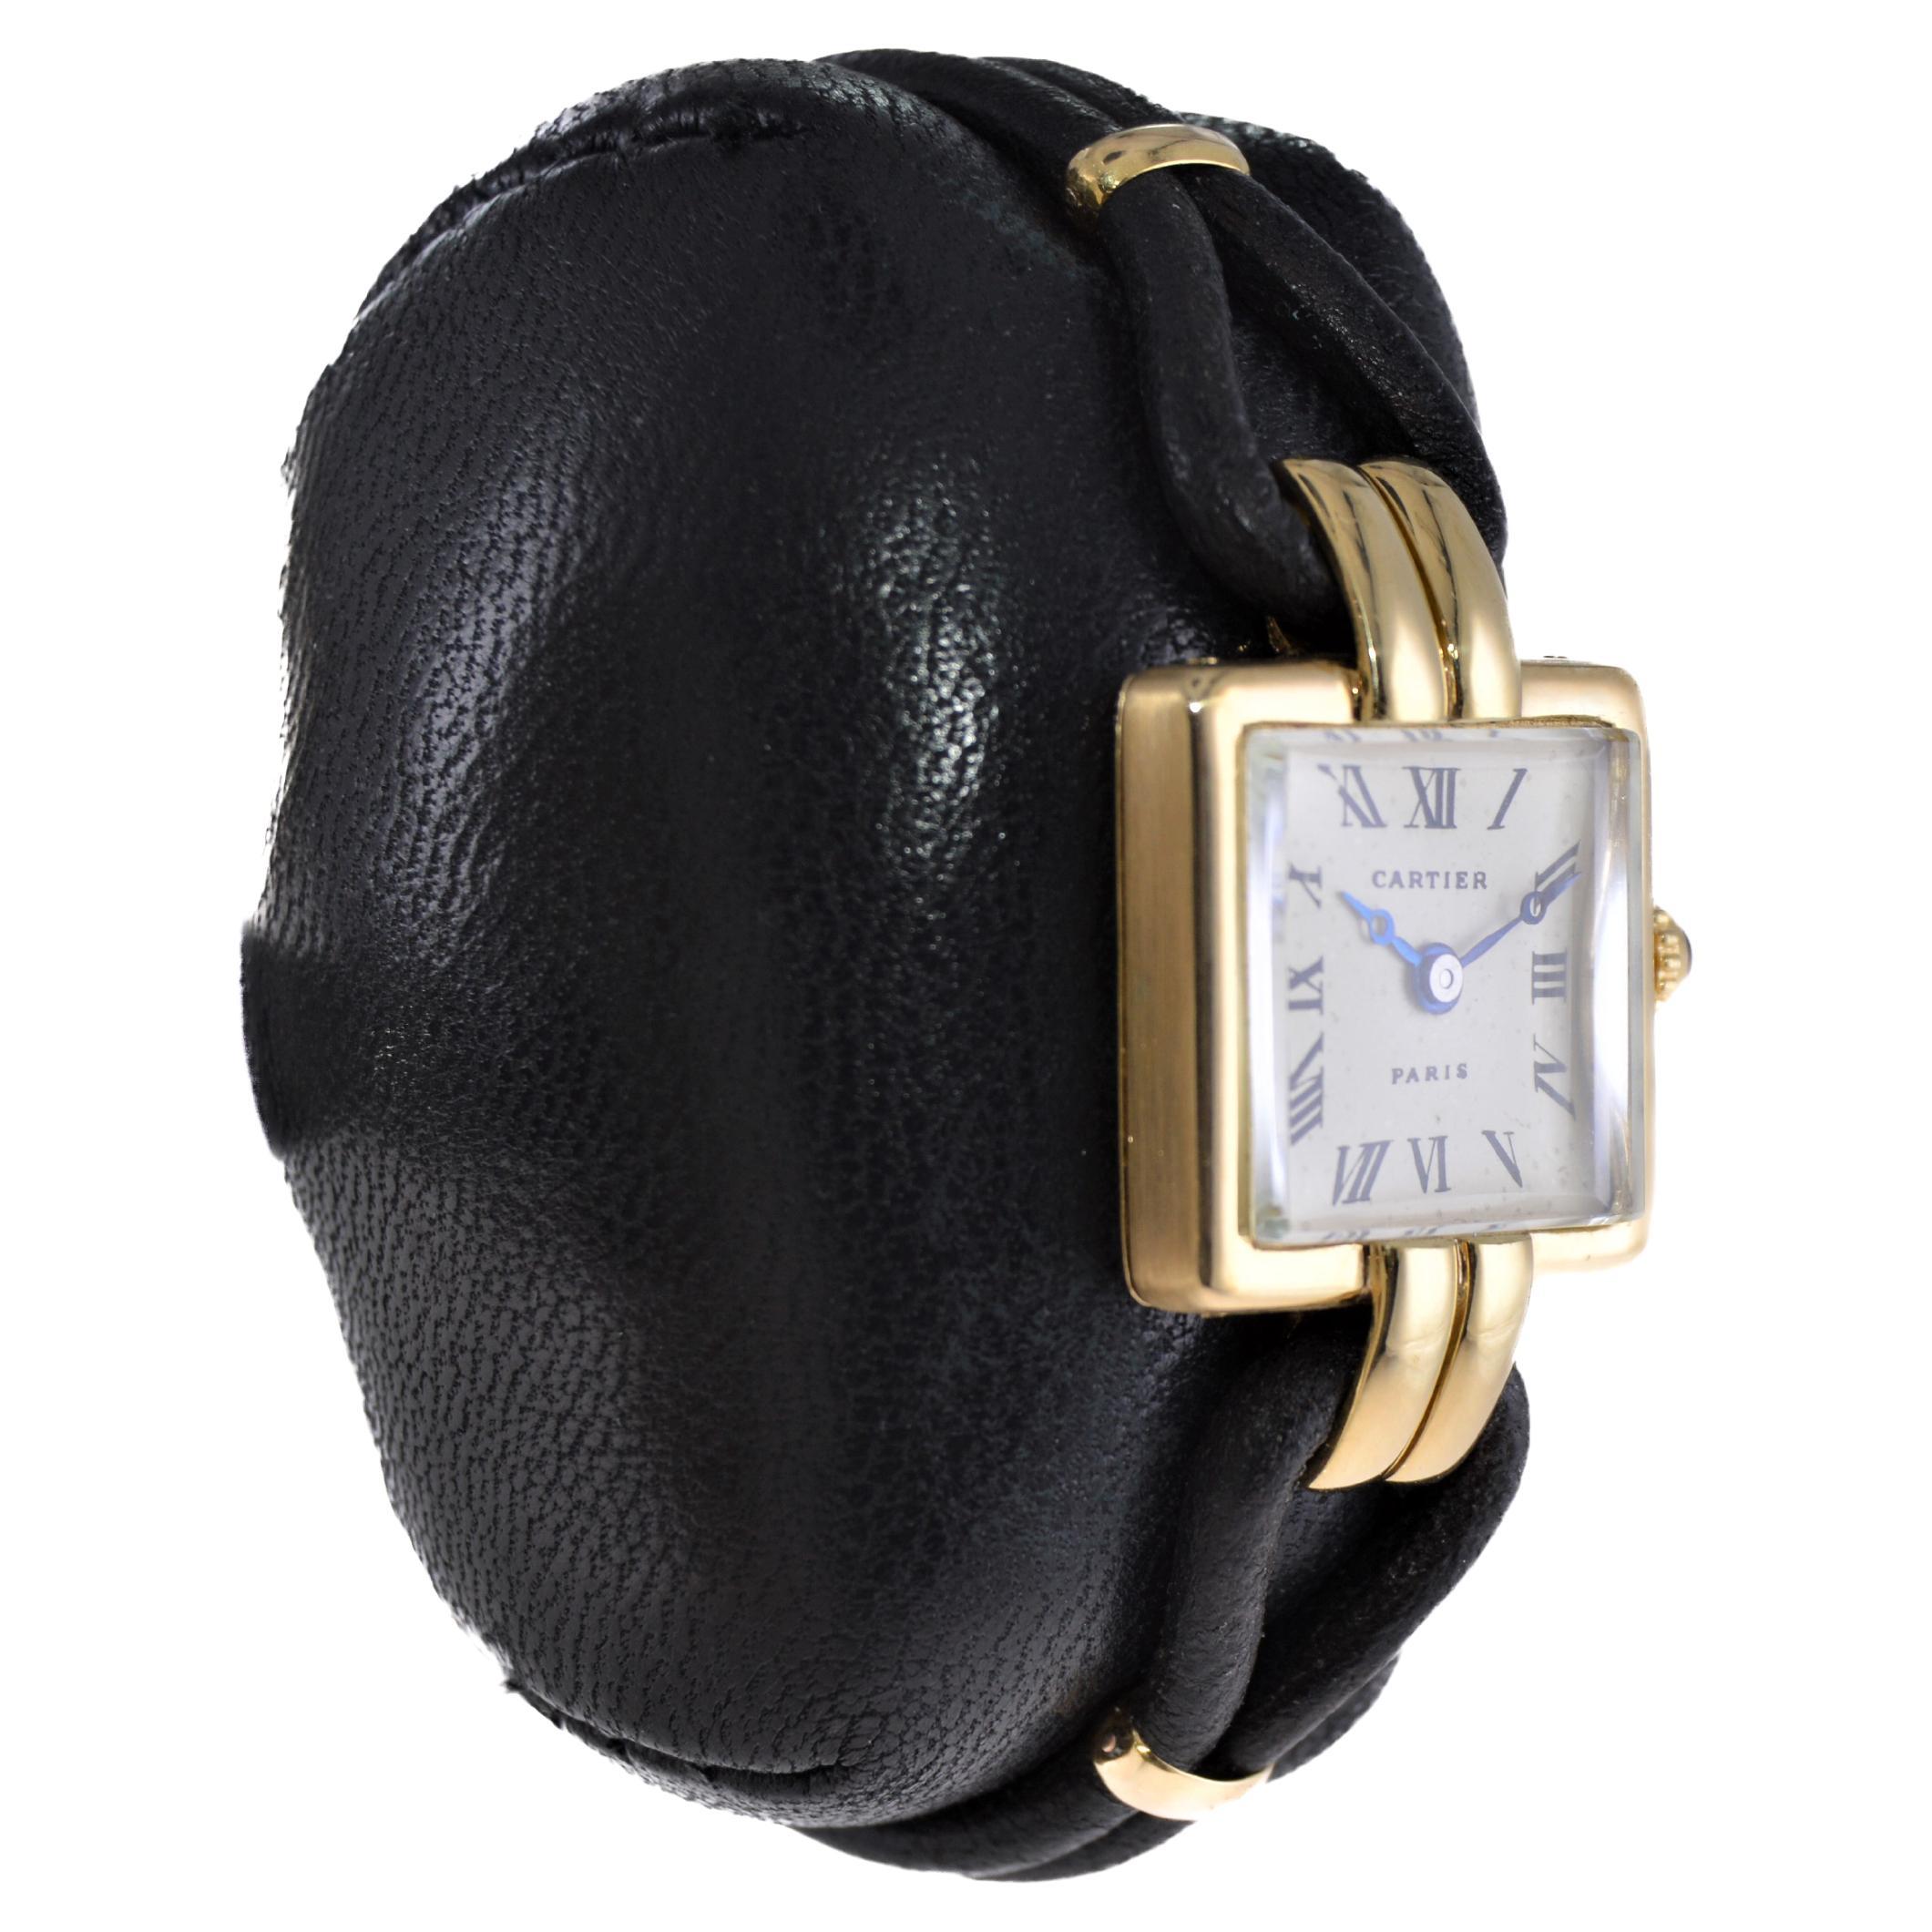 FACTORY / HOUSE: Cartier Paris
STYLE / REFERENCE: Art Deco / Square
METAL / MATERIAL: 18Kt. Yellow Gold 
CIRCA / YEAR: 1930's
DIMENSIONS / SIZE: Length 32mm X Width 20mm 
MOVEMENT / CALIBER: Retrofitted by Cartier with a Modern Manual Winding